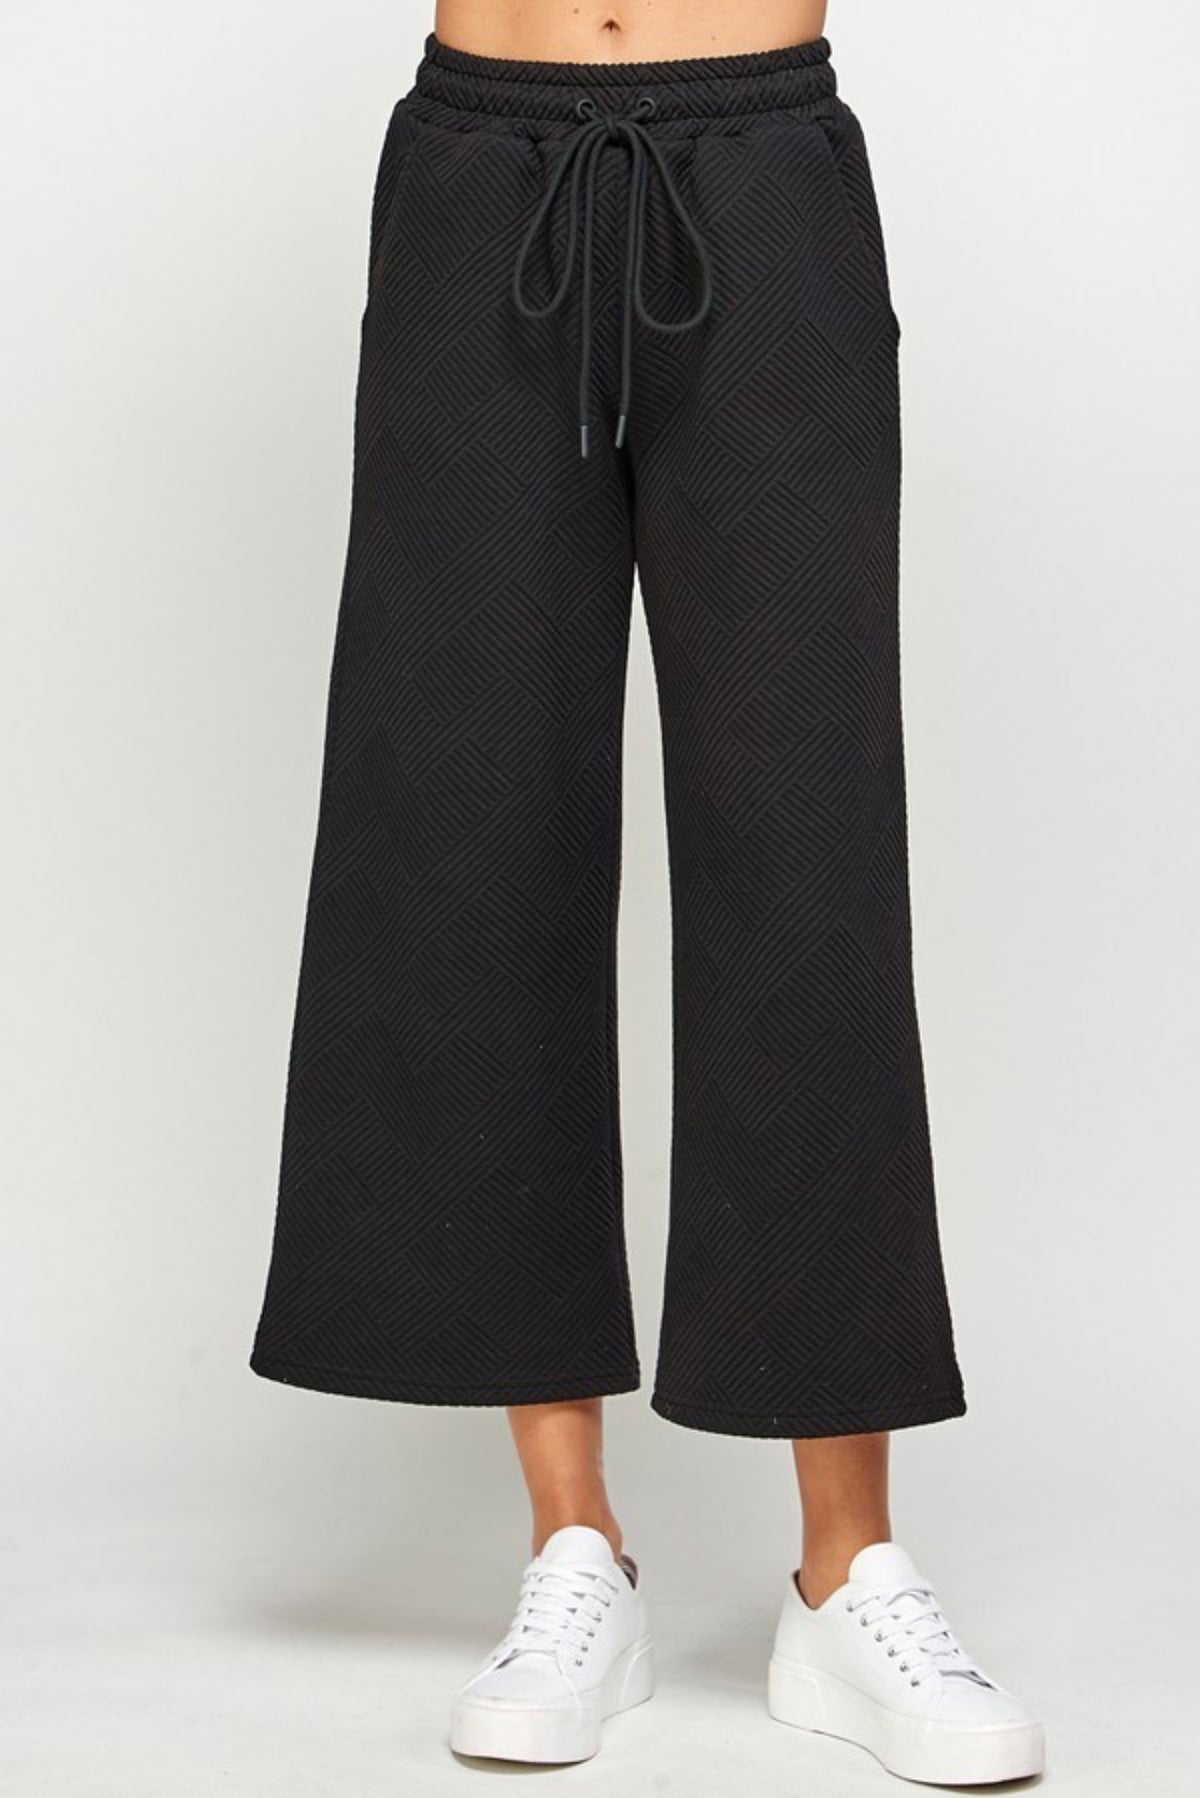 TEXTURE CROPPED FLARE PANT